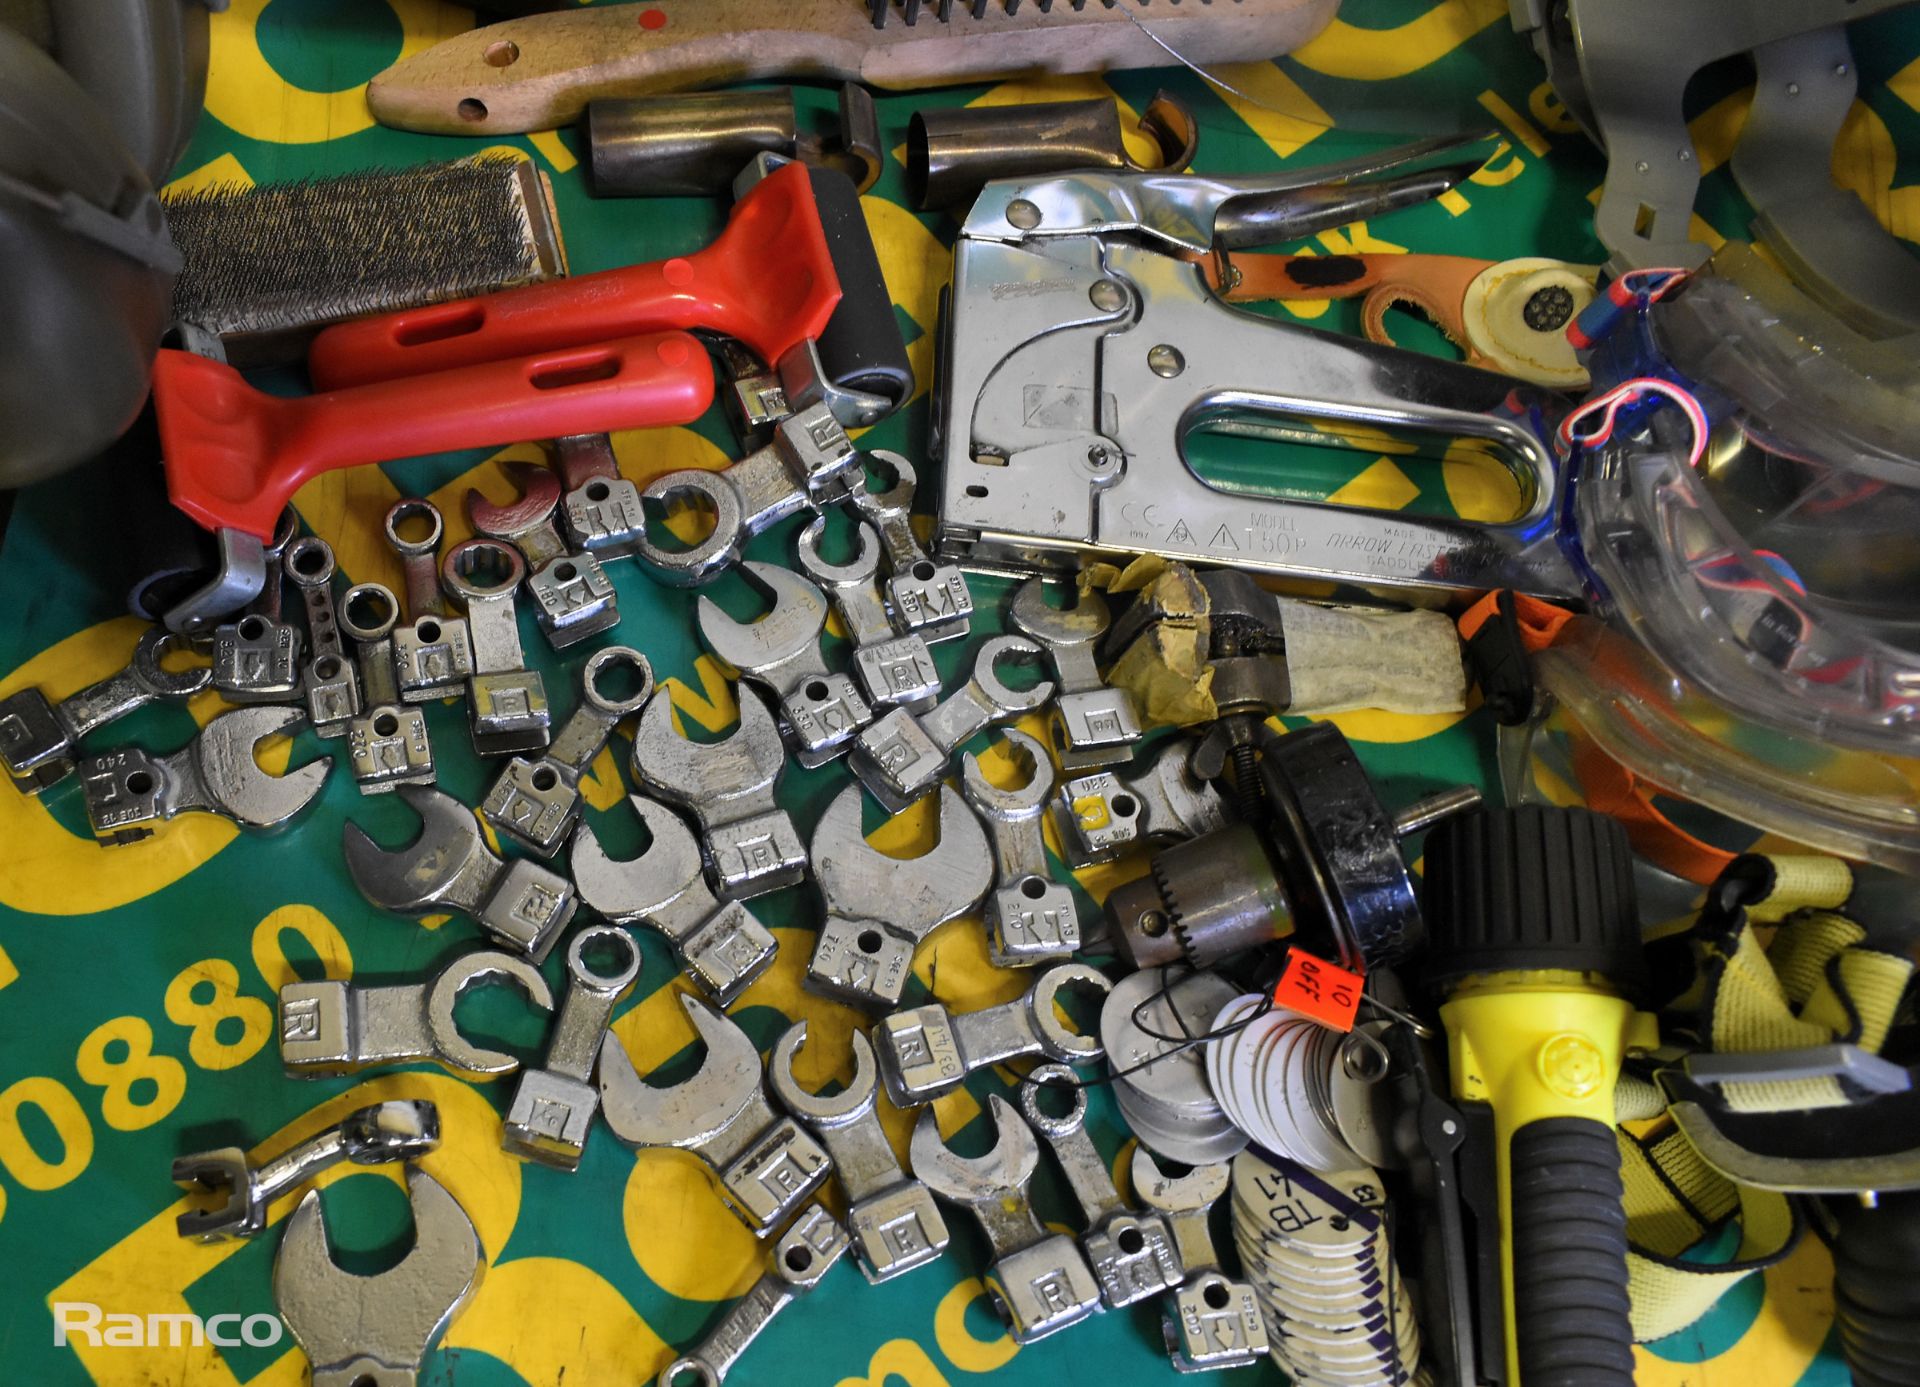 Workshop tools and equipment - torque head adapters, spanner, torches, wire brushes, face shields - Image 3 of 7